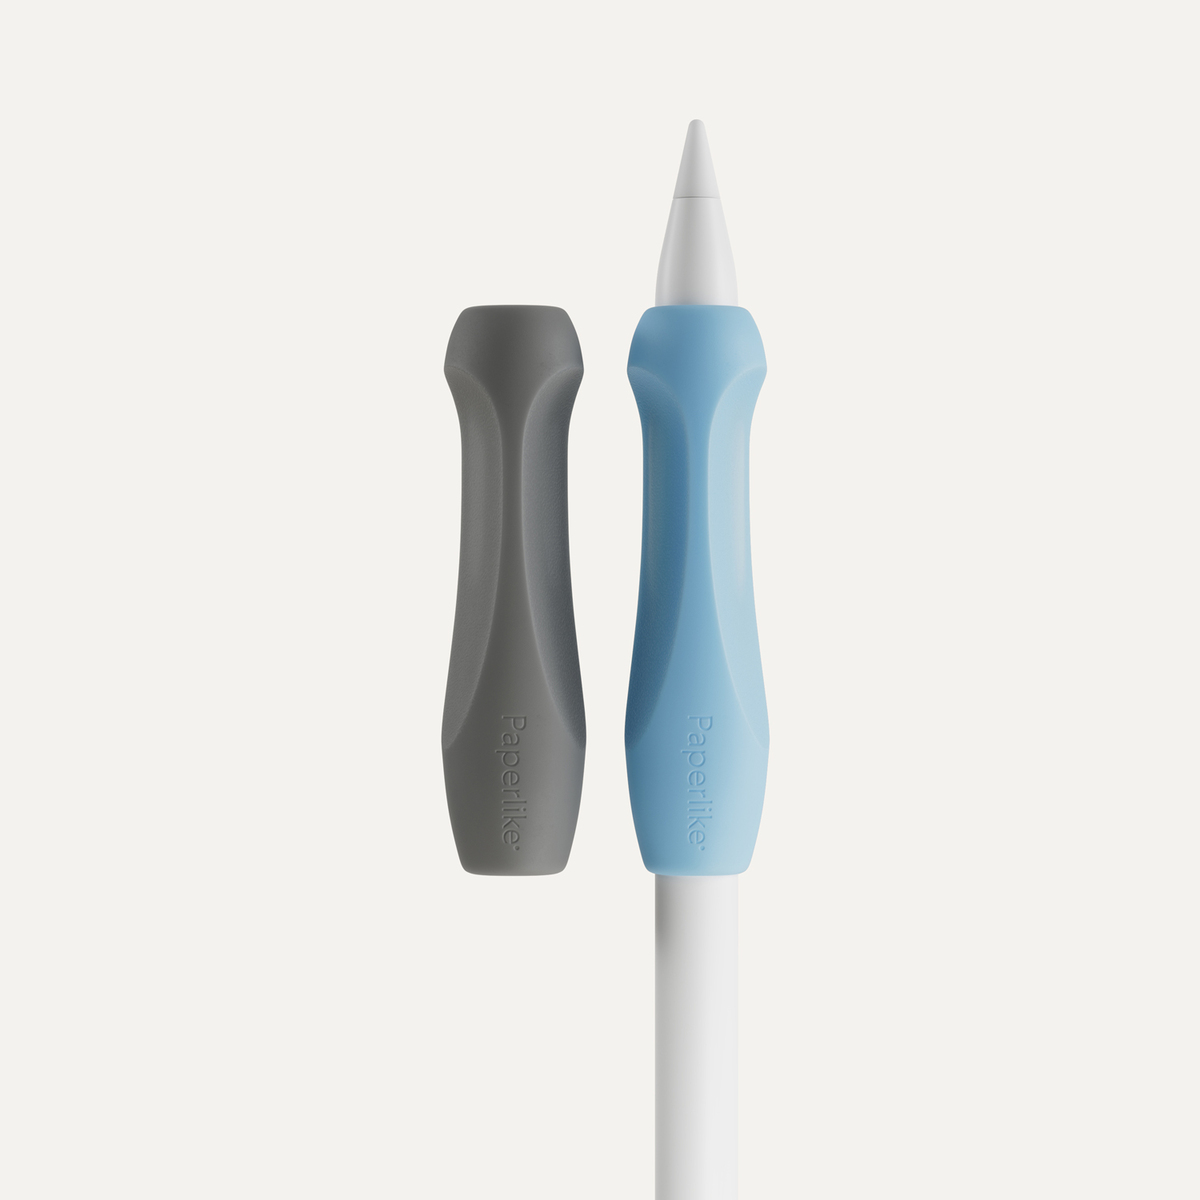 Two Paperlike pencil grips and an Apple Pencil